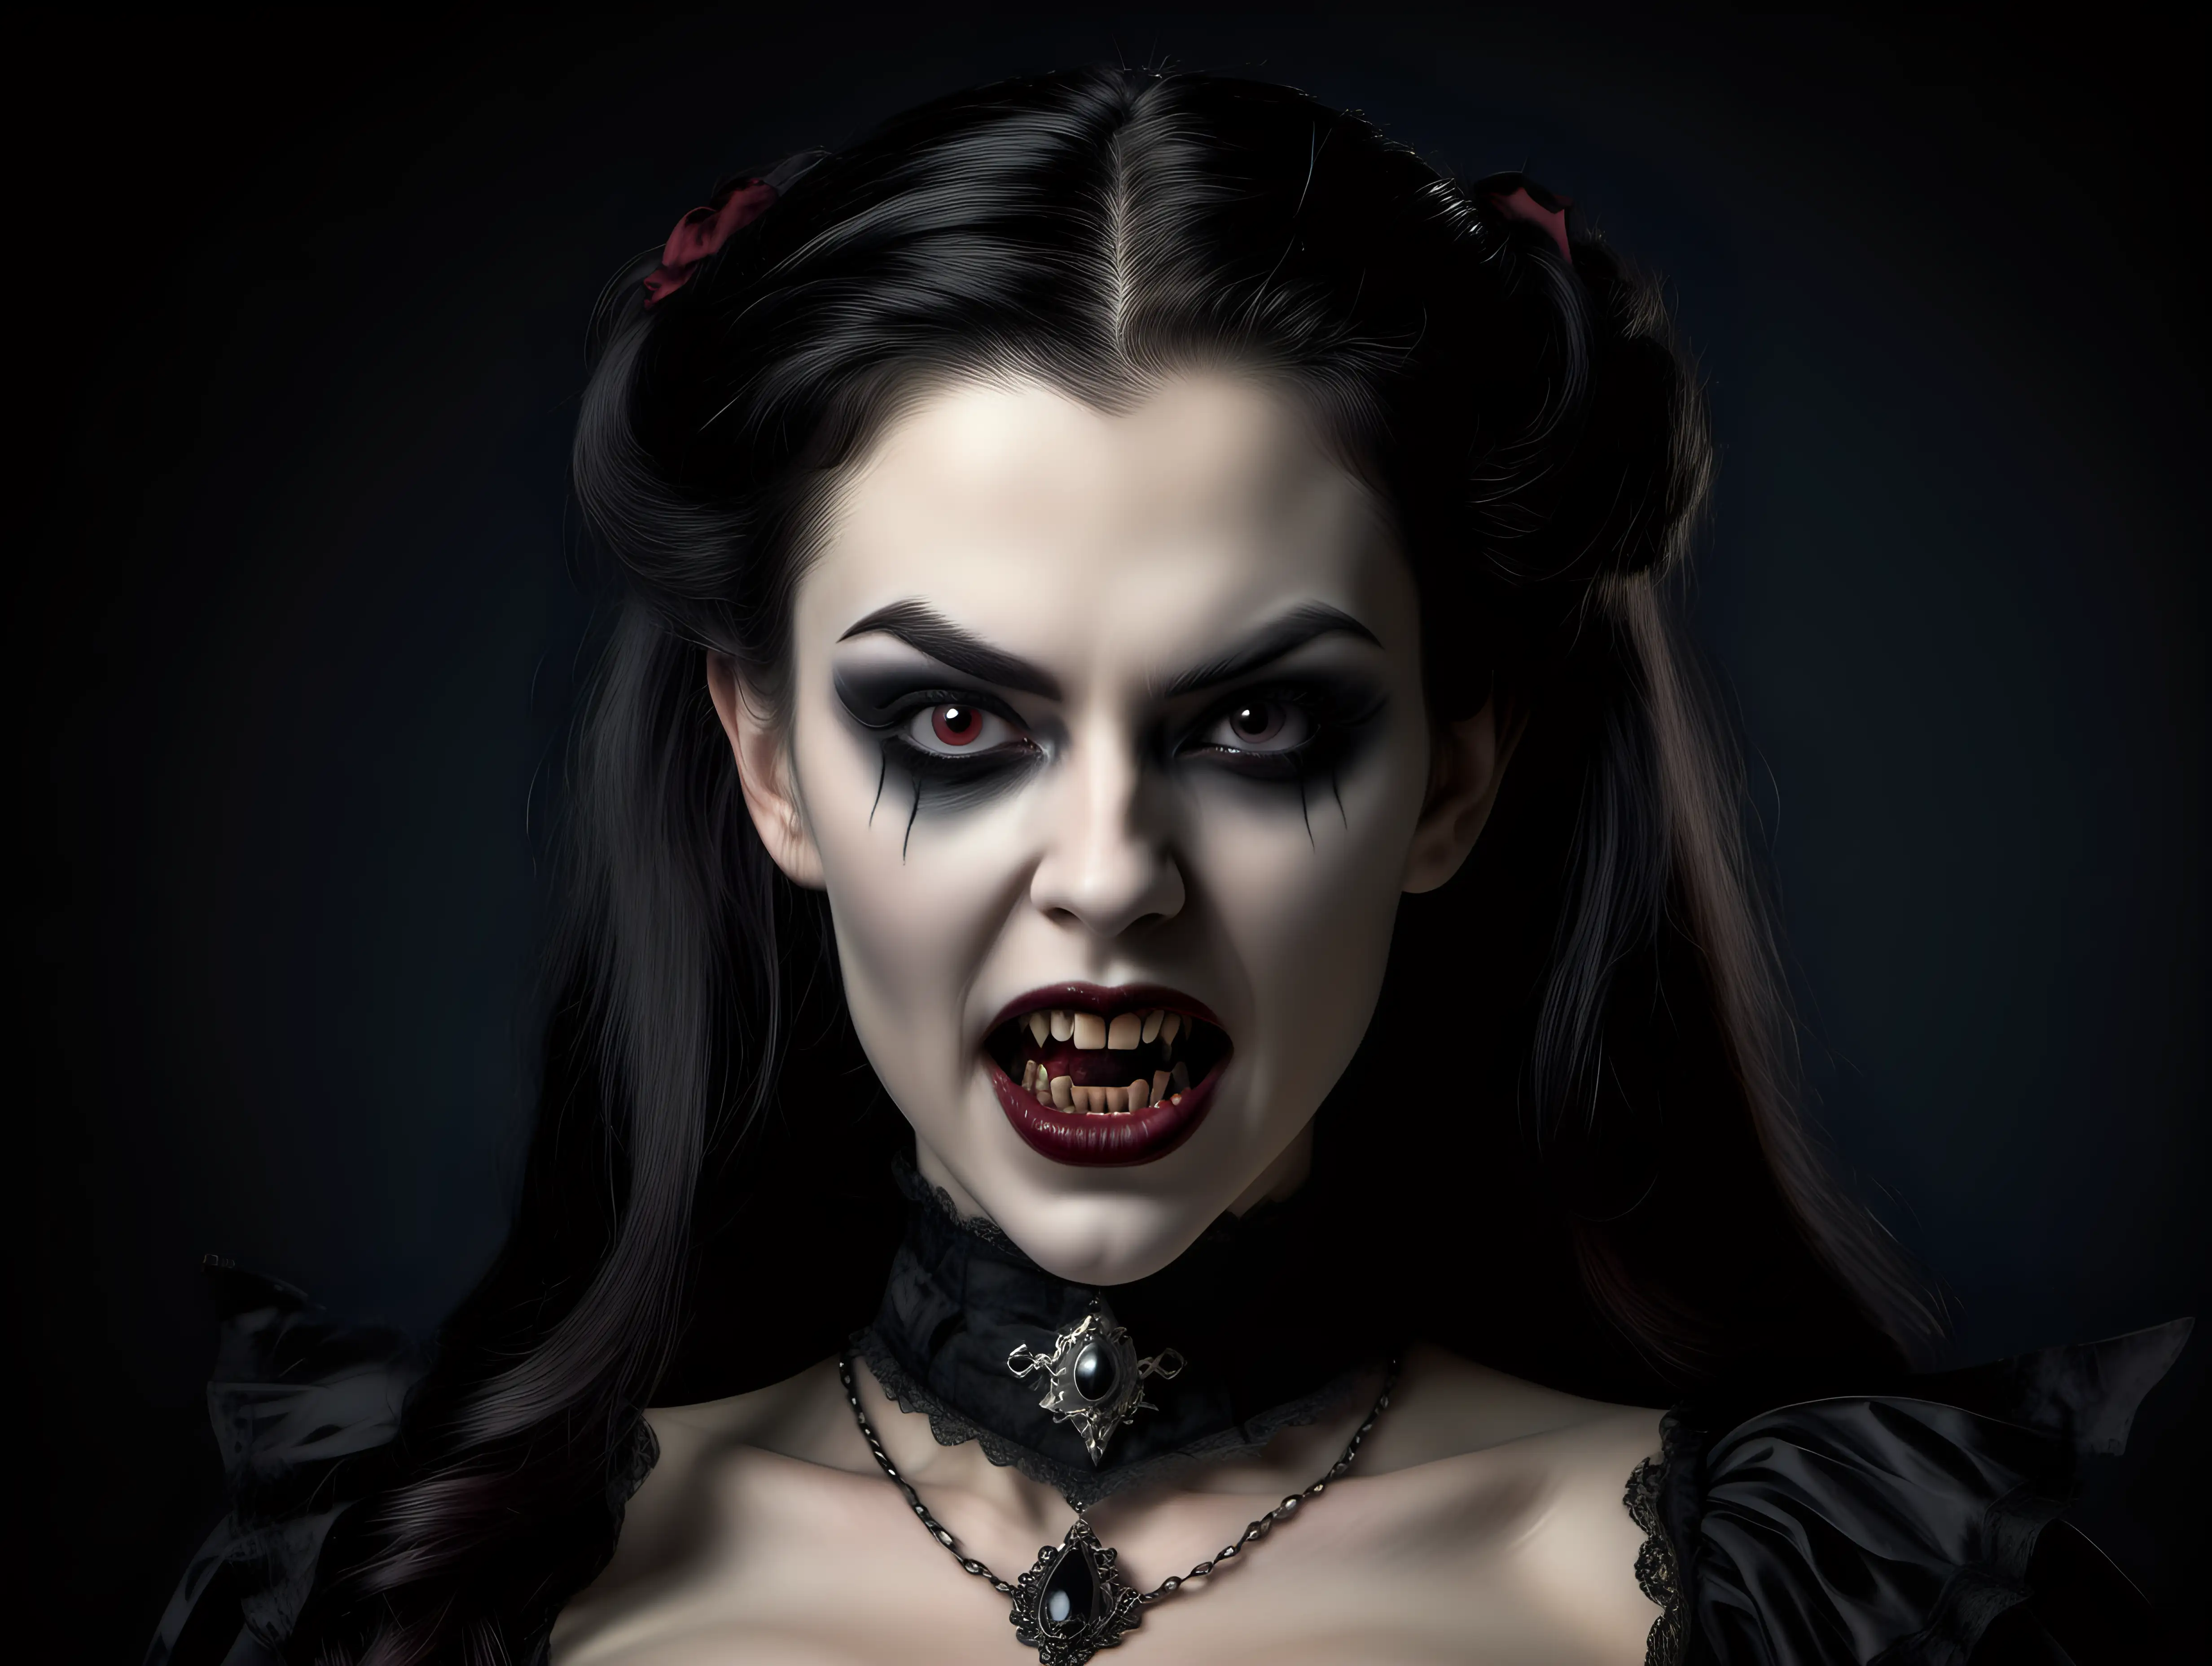 Realistic Victorian Vampire woman, 25 years old with a clear and symmetrical face, gorgeous features, corset, beautiful, dark, evil, mouth open, two very long sharp canine teeth on the top jaw longer than the other teeth